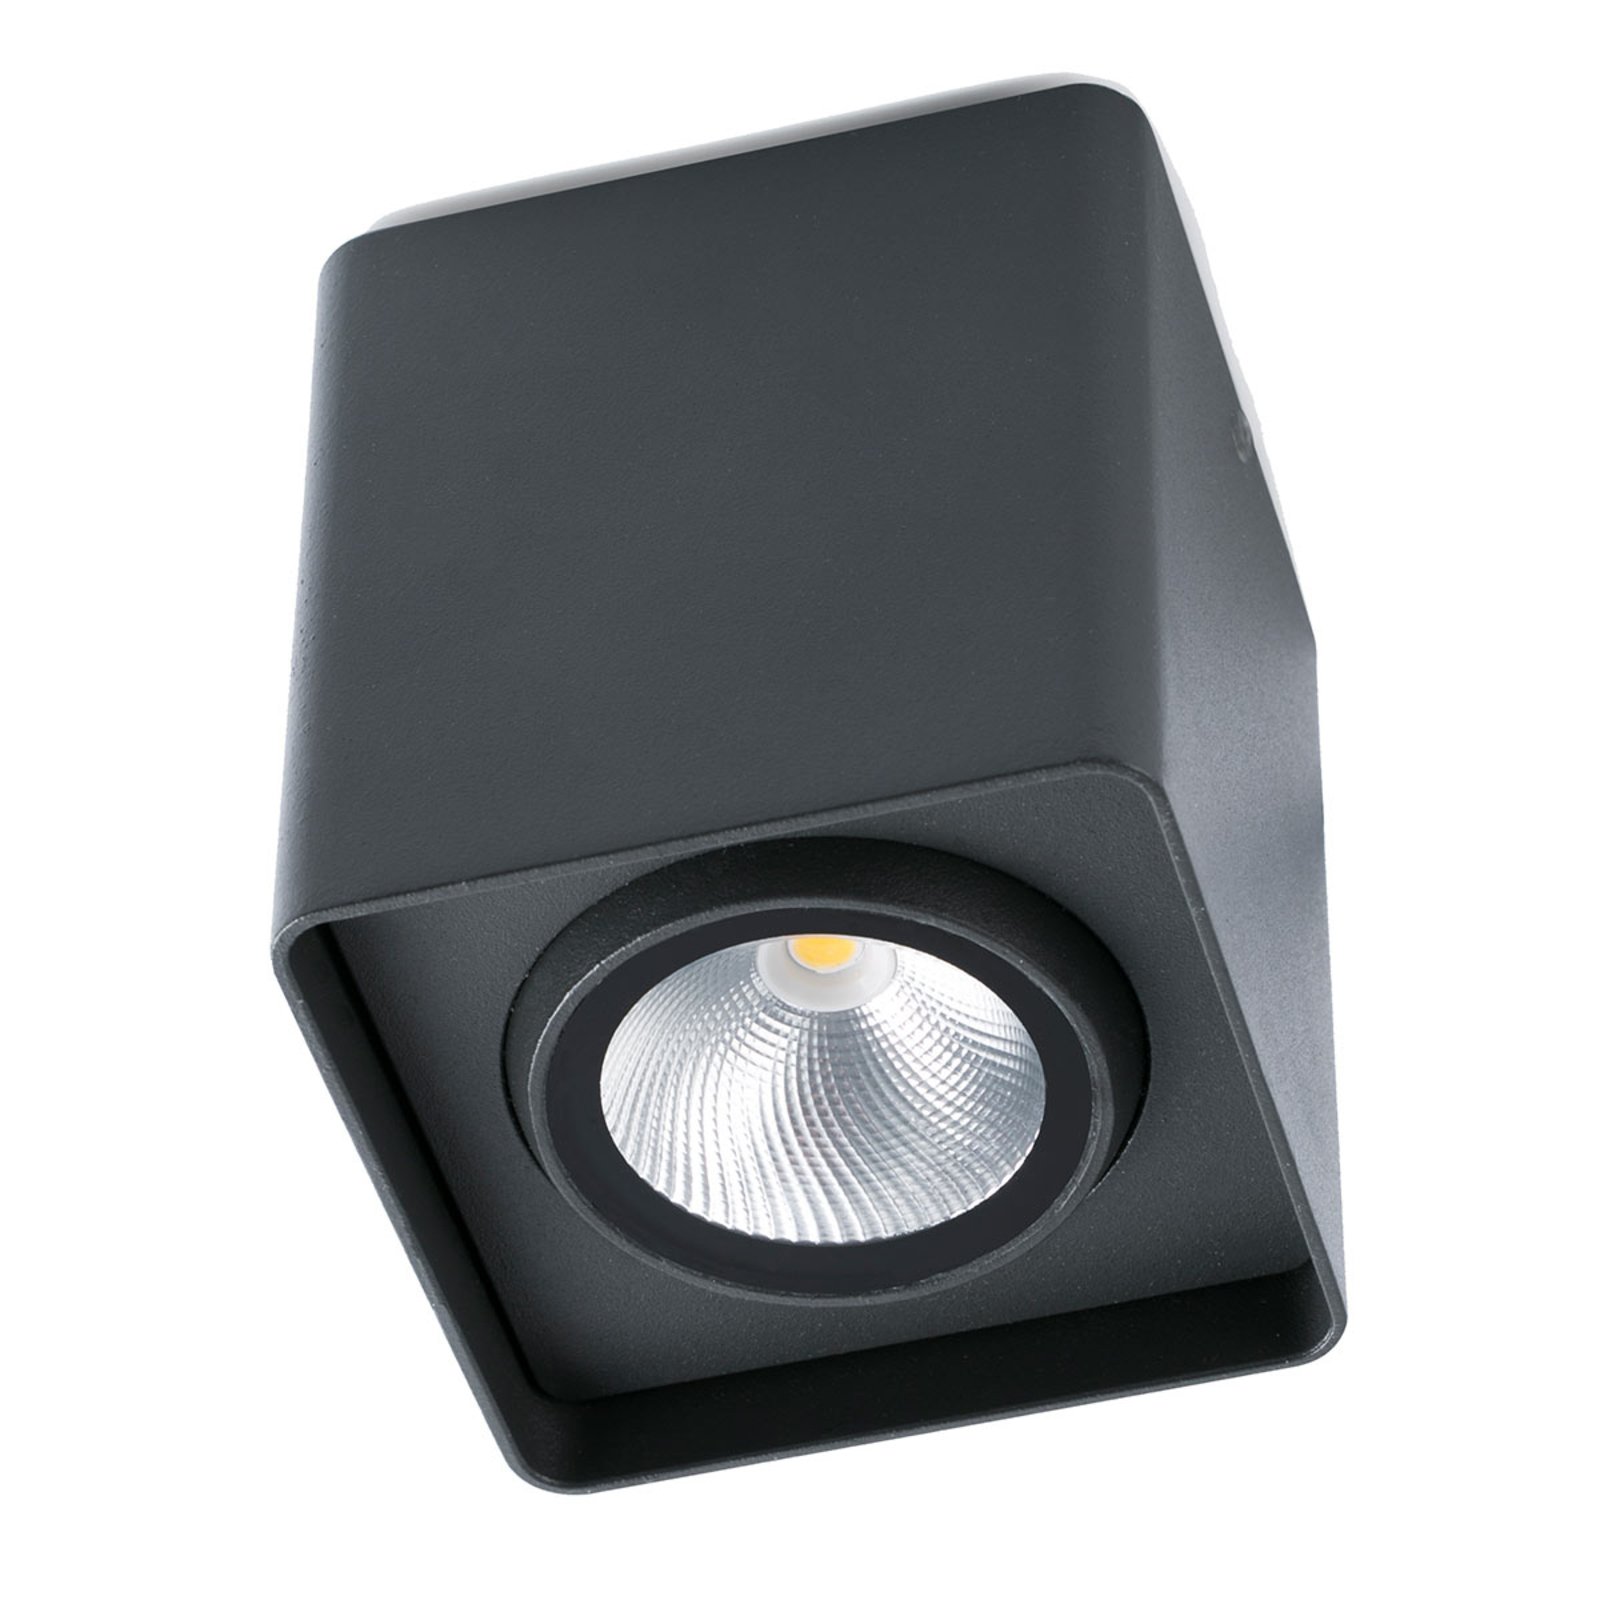 Discreet Tami LED ceiling spotlight for outdoors